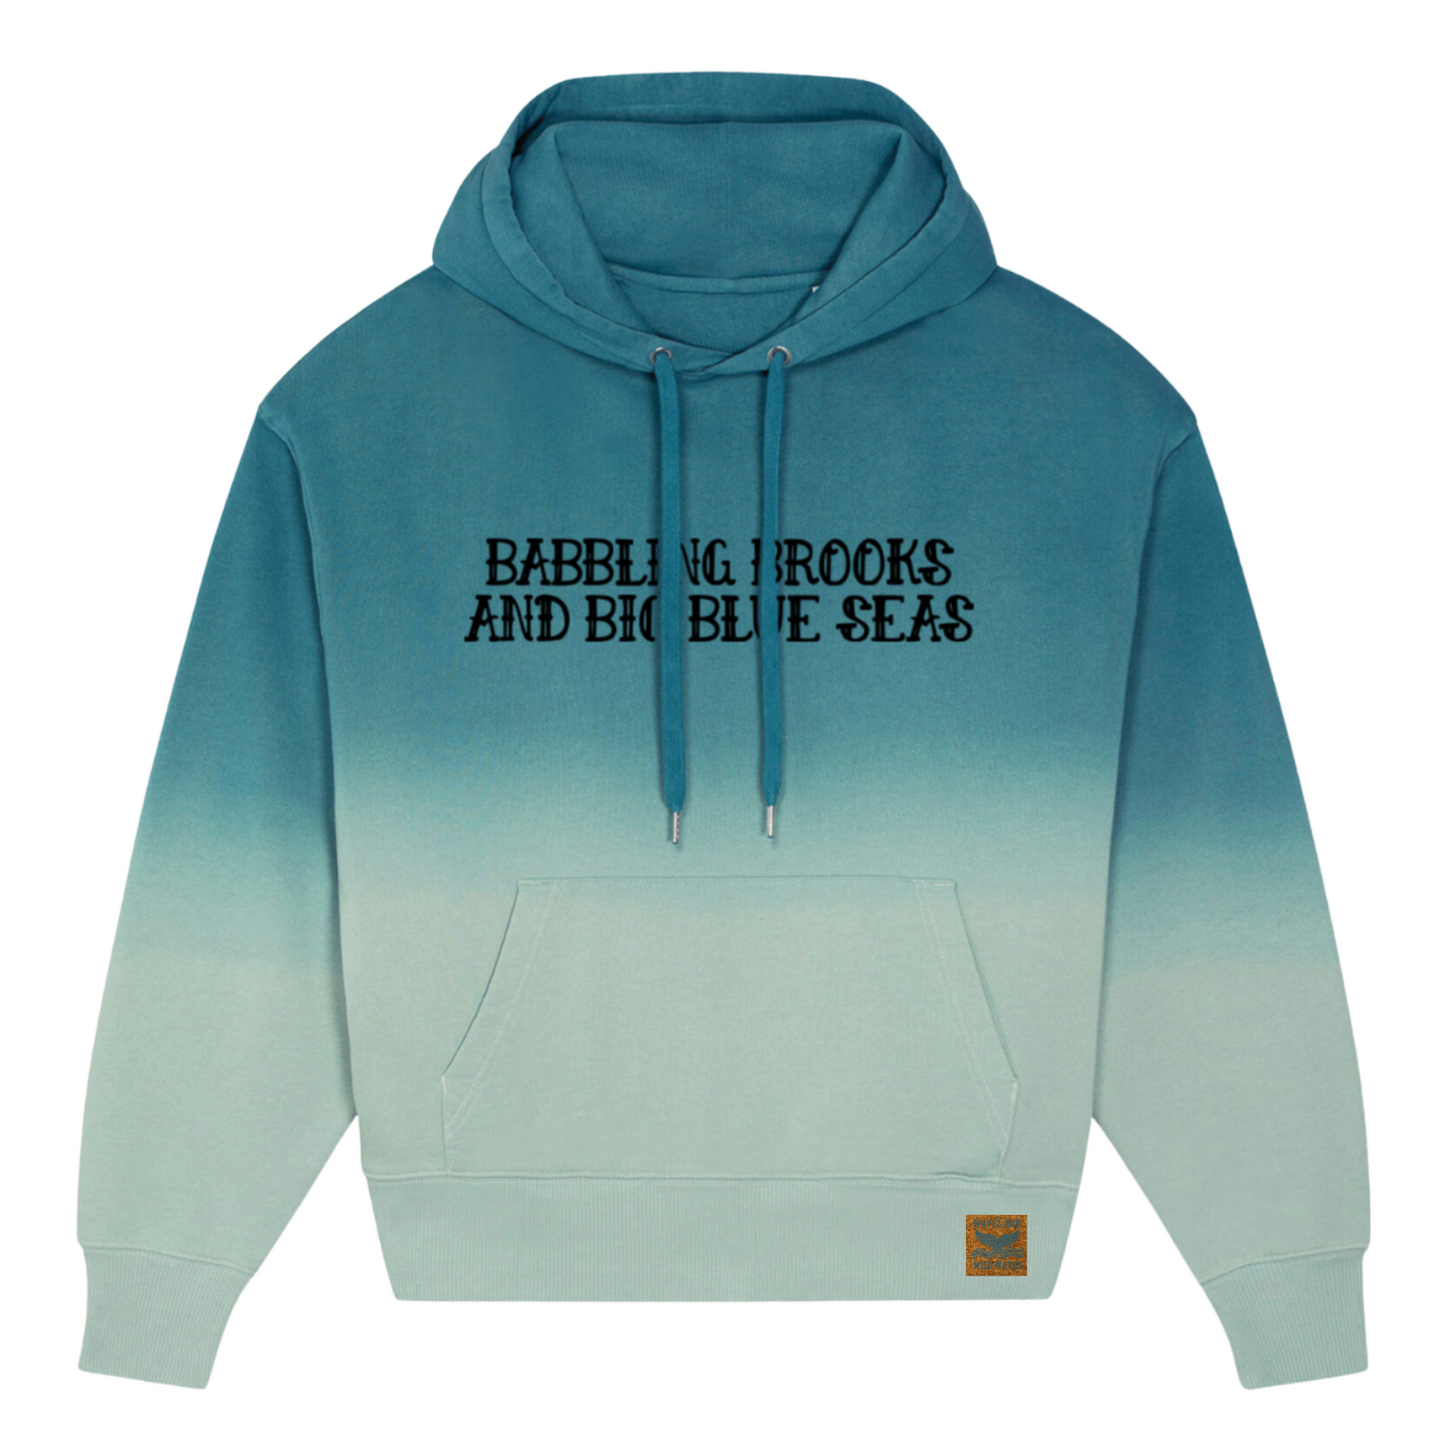 A hoodie in shades blue and the text 'Babbling Brooks and Big Blue Seas' printed in black across the chest.